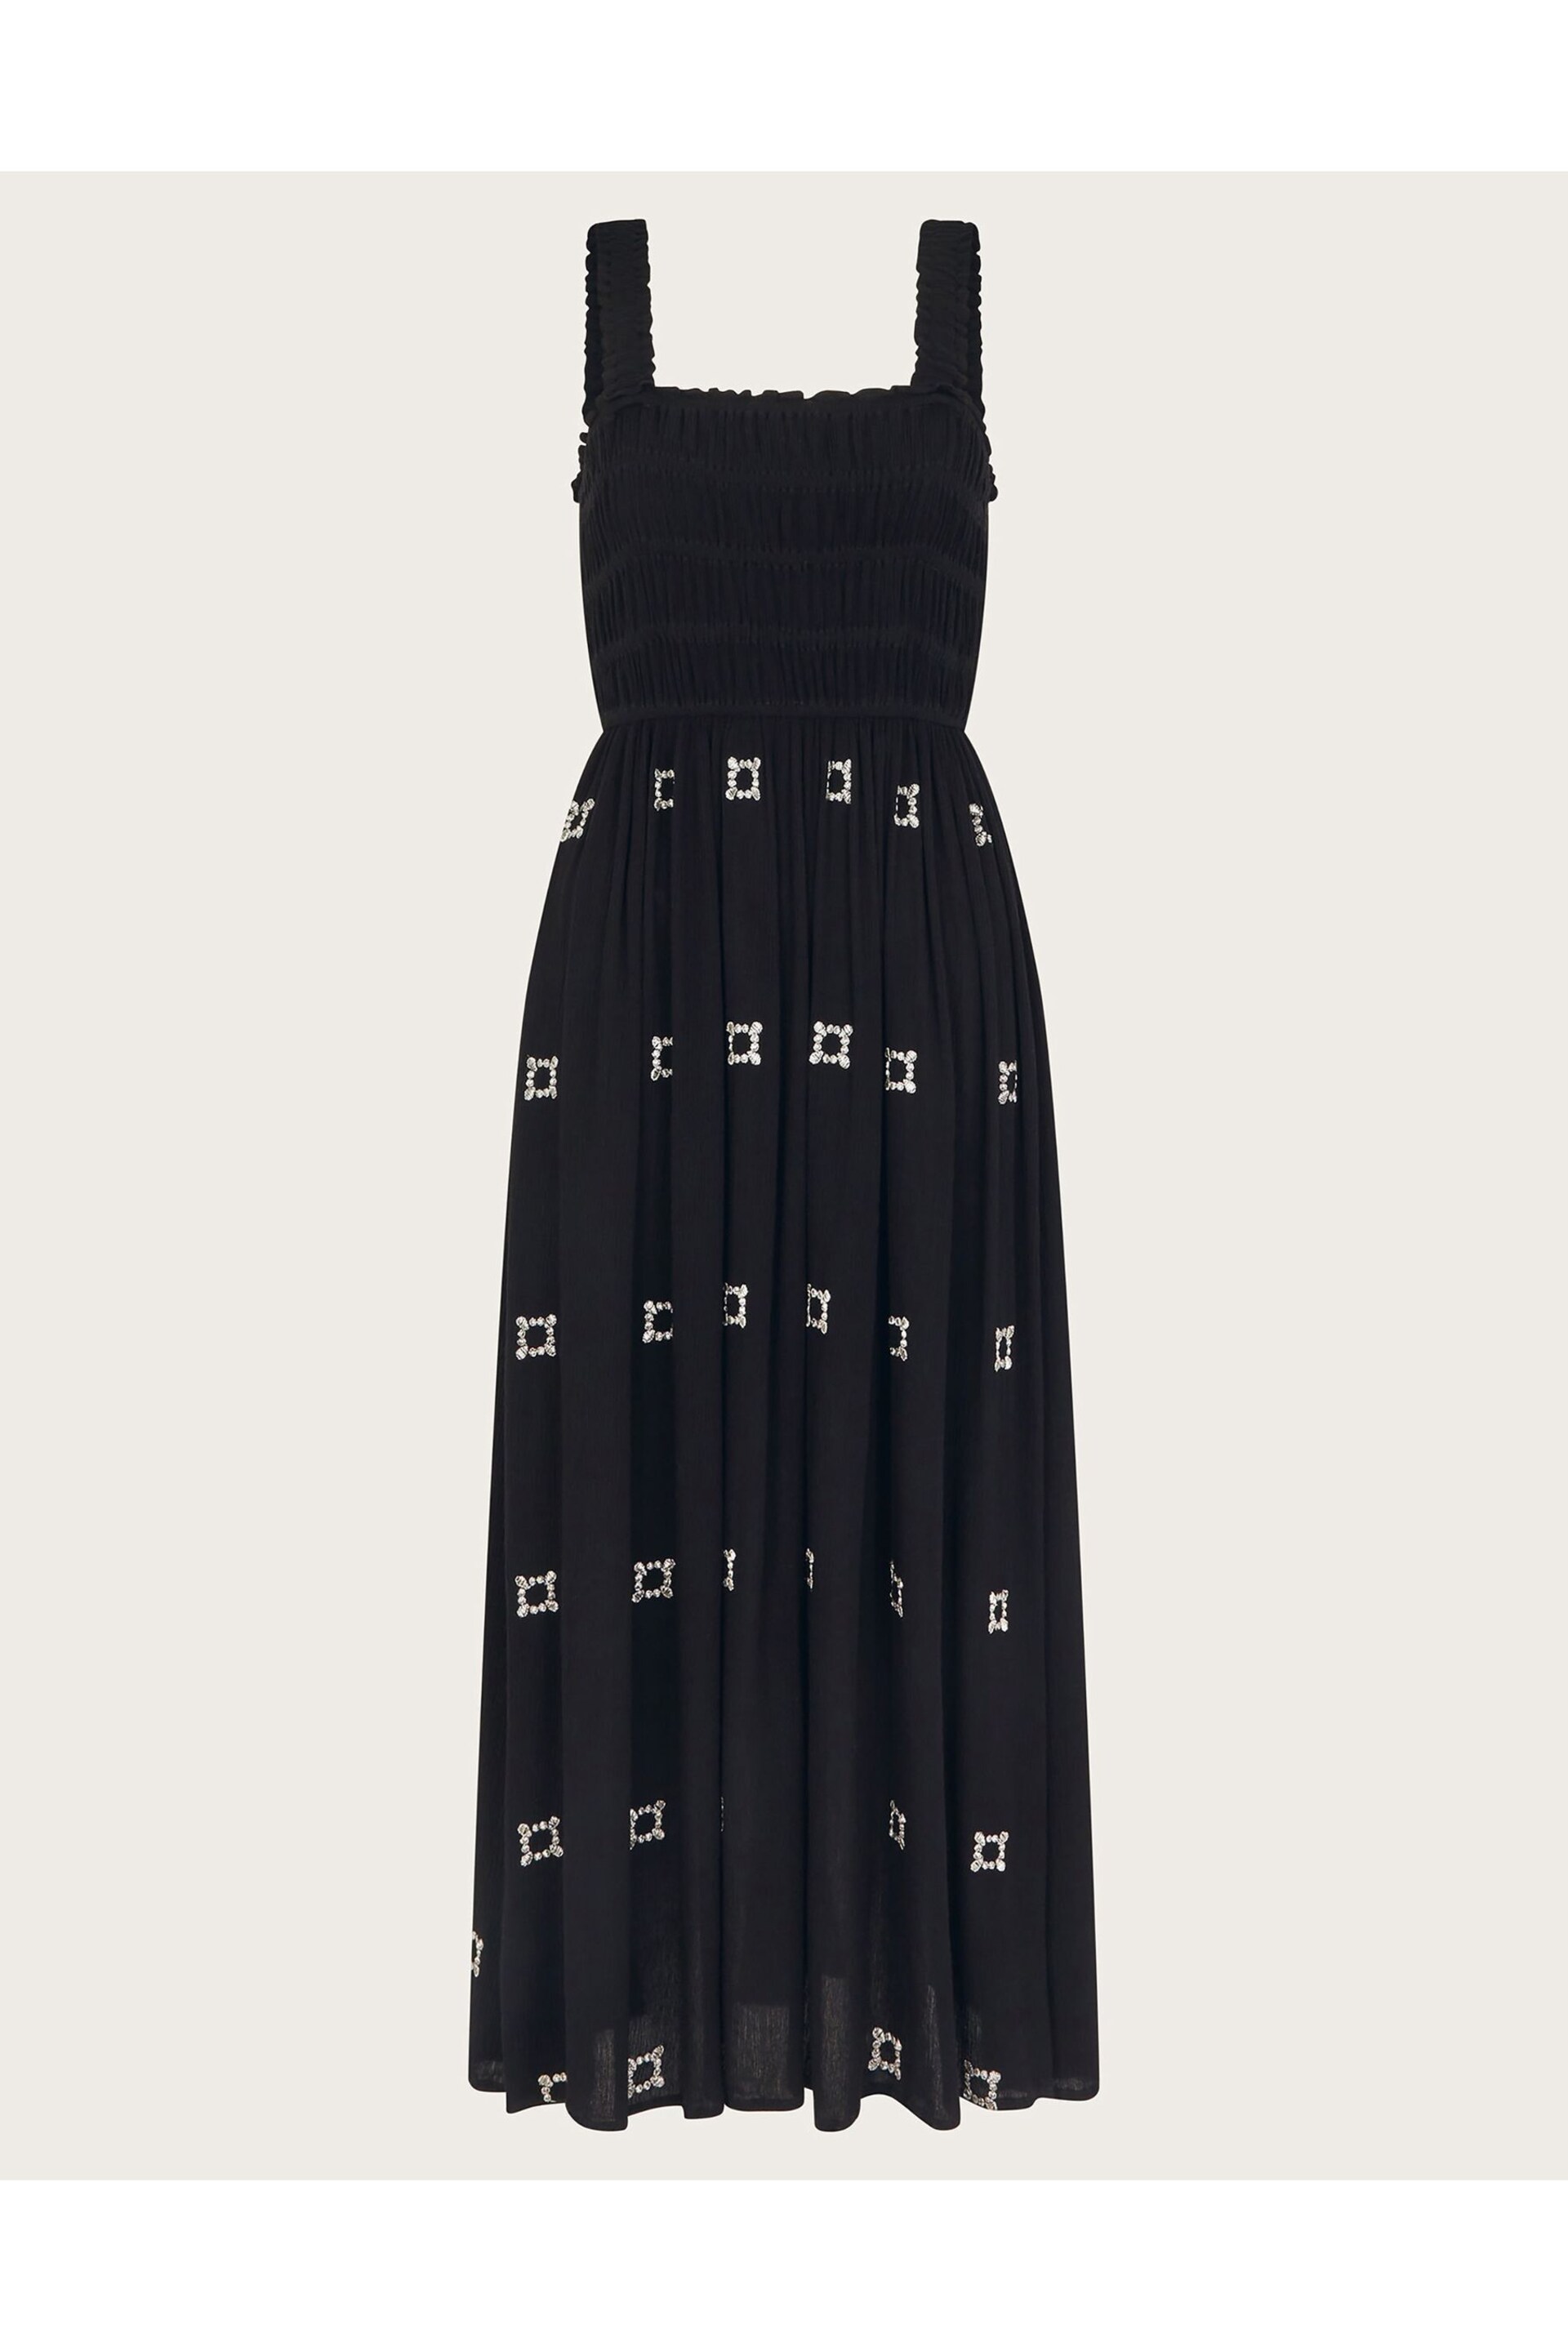 Monsoon Black Briar Embroidered Dress - Image 2 of 5